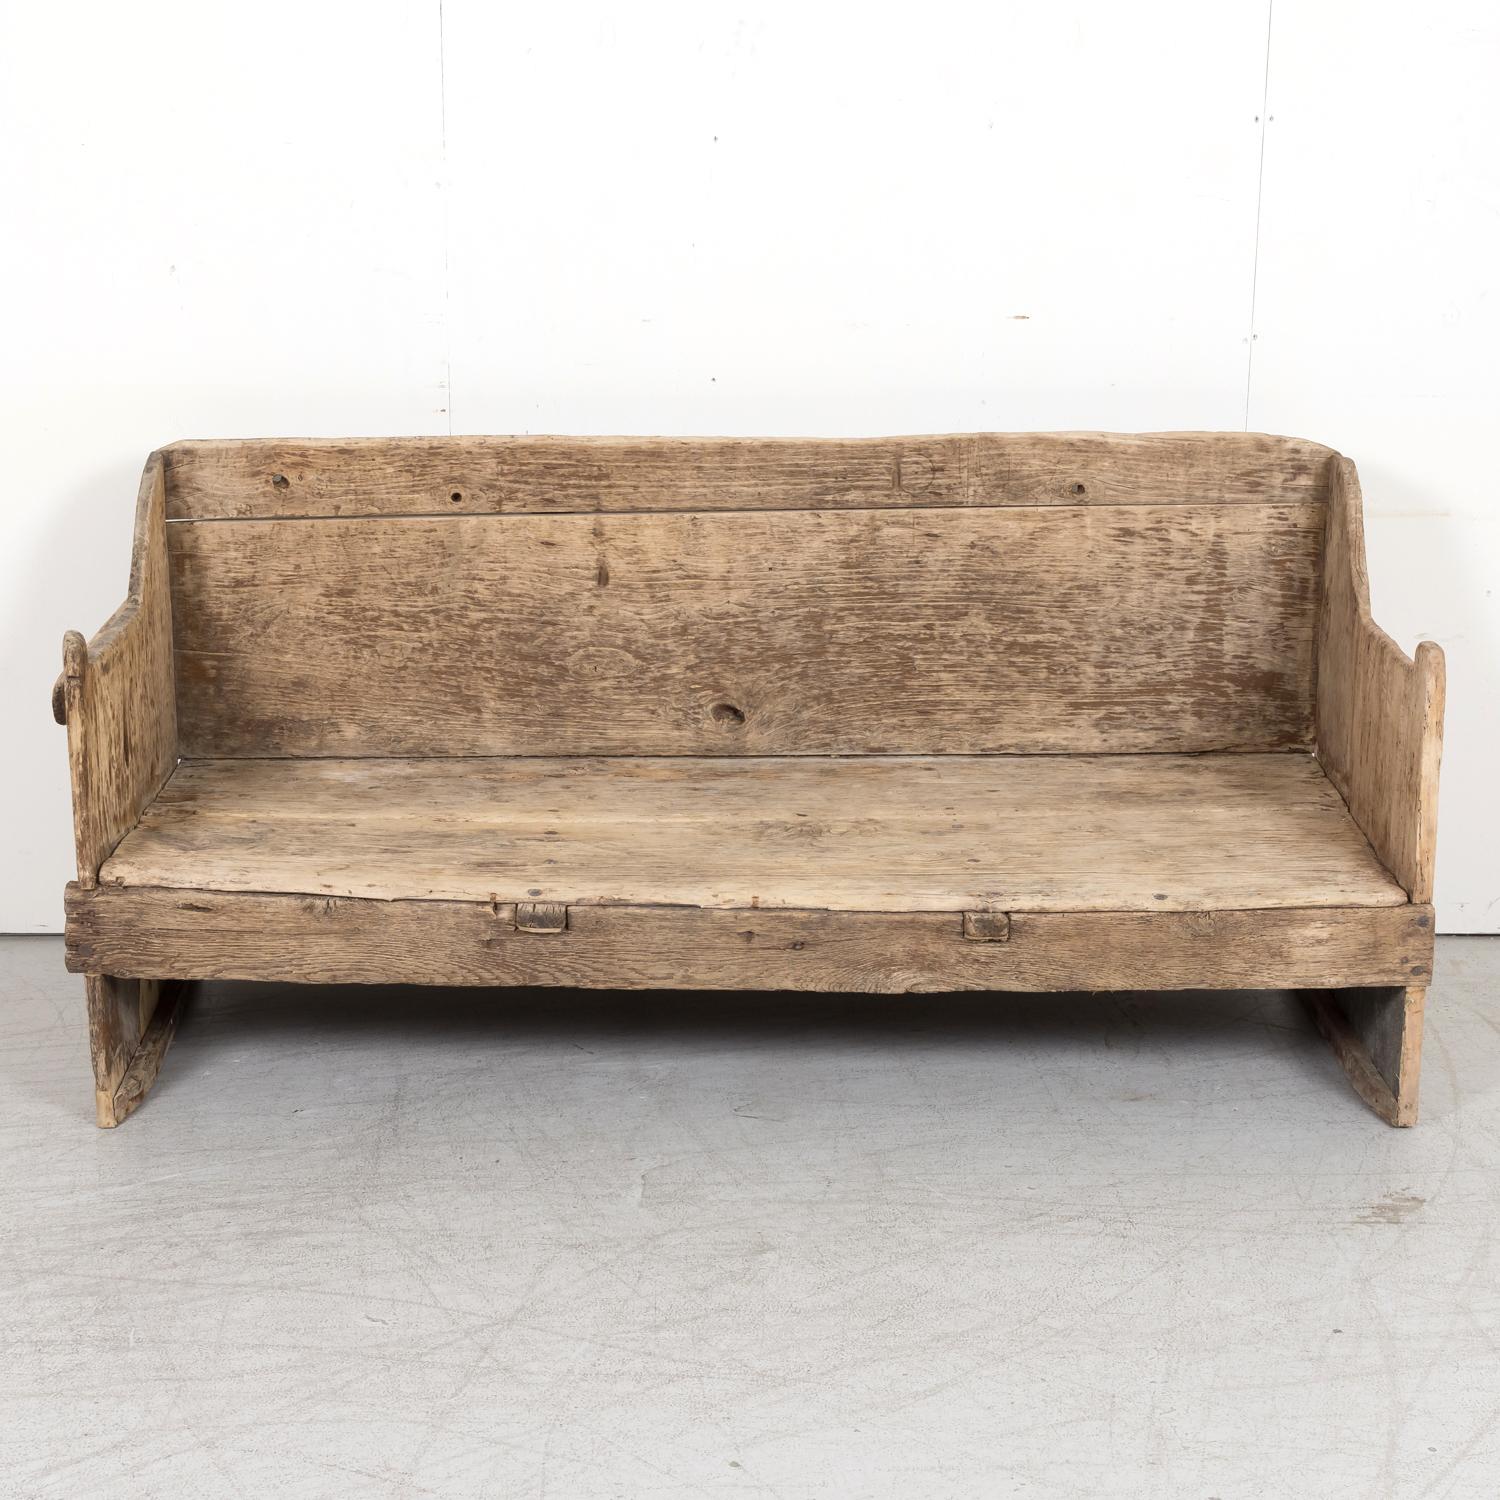 A very handsome late 17th century primitive bench from the Catalan region of Spain, circa 1680s. Handcrafted of pine, this Spanish bench features plank construction and an amazing sun washed patina that has weathered beautifully over the last two